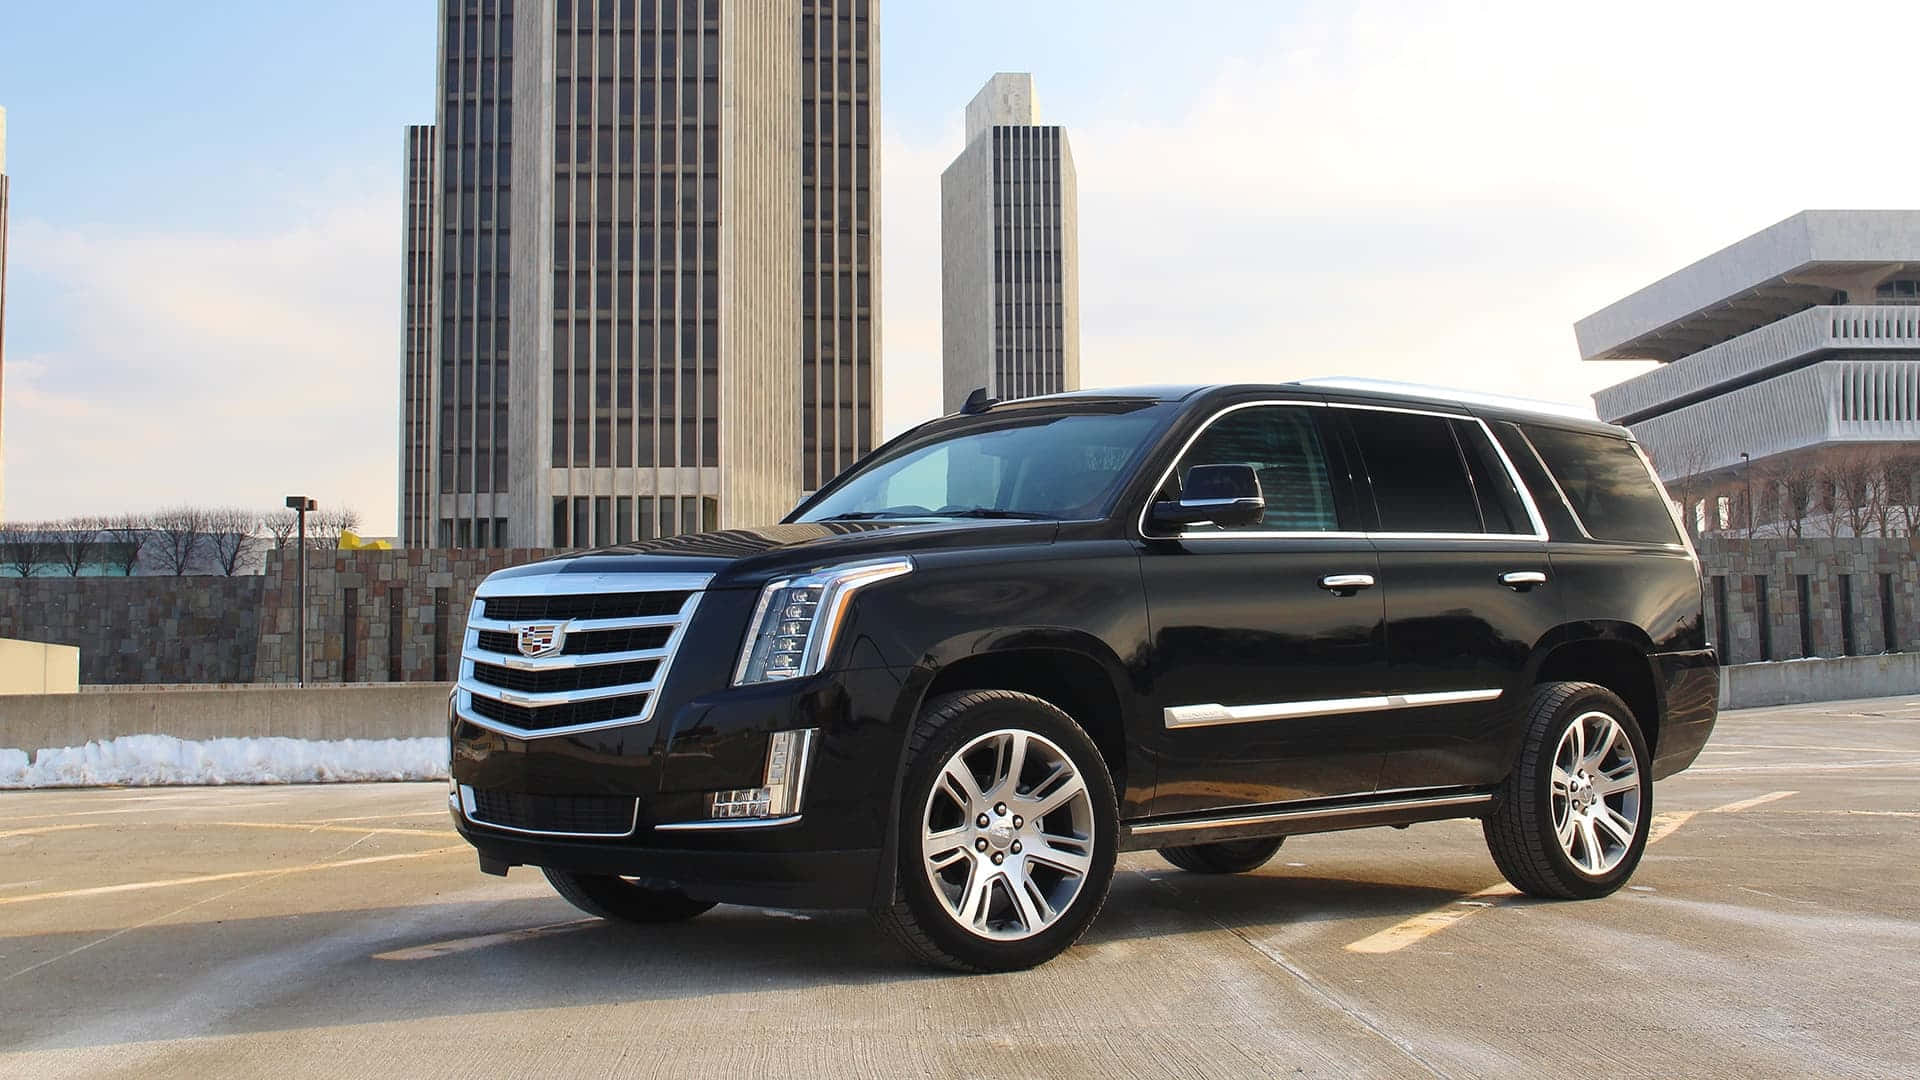 Luxury and Power Unleashed - The Cadillac Escalade Wallpaper